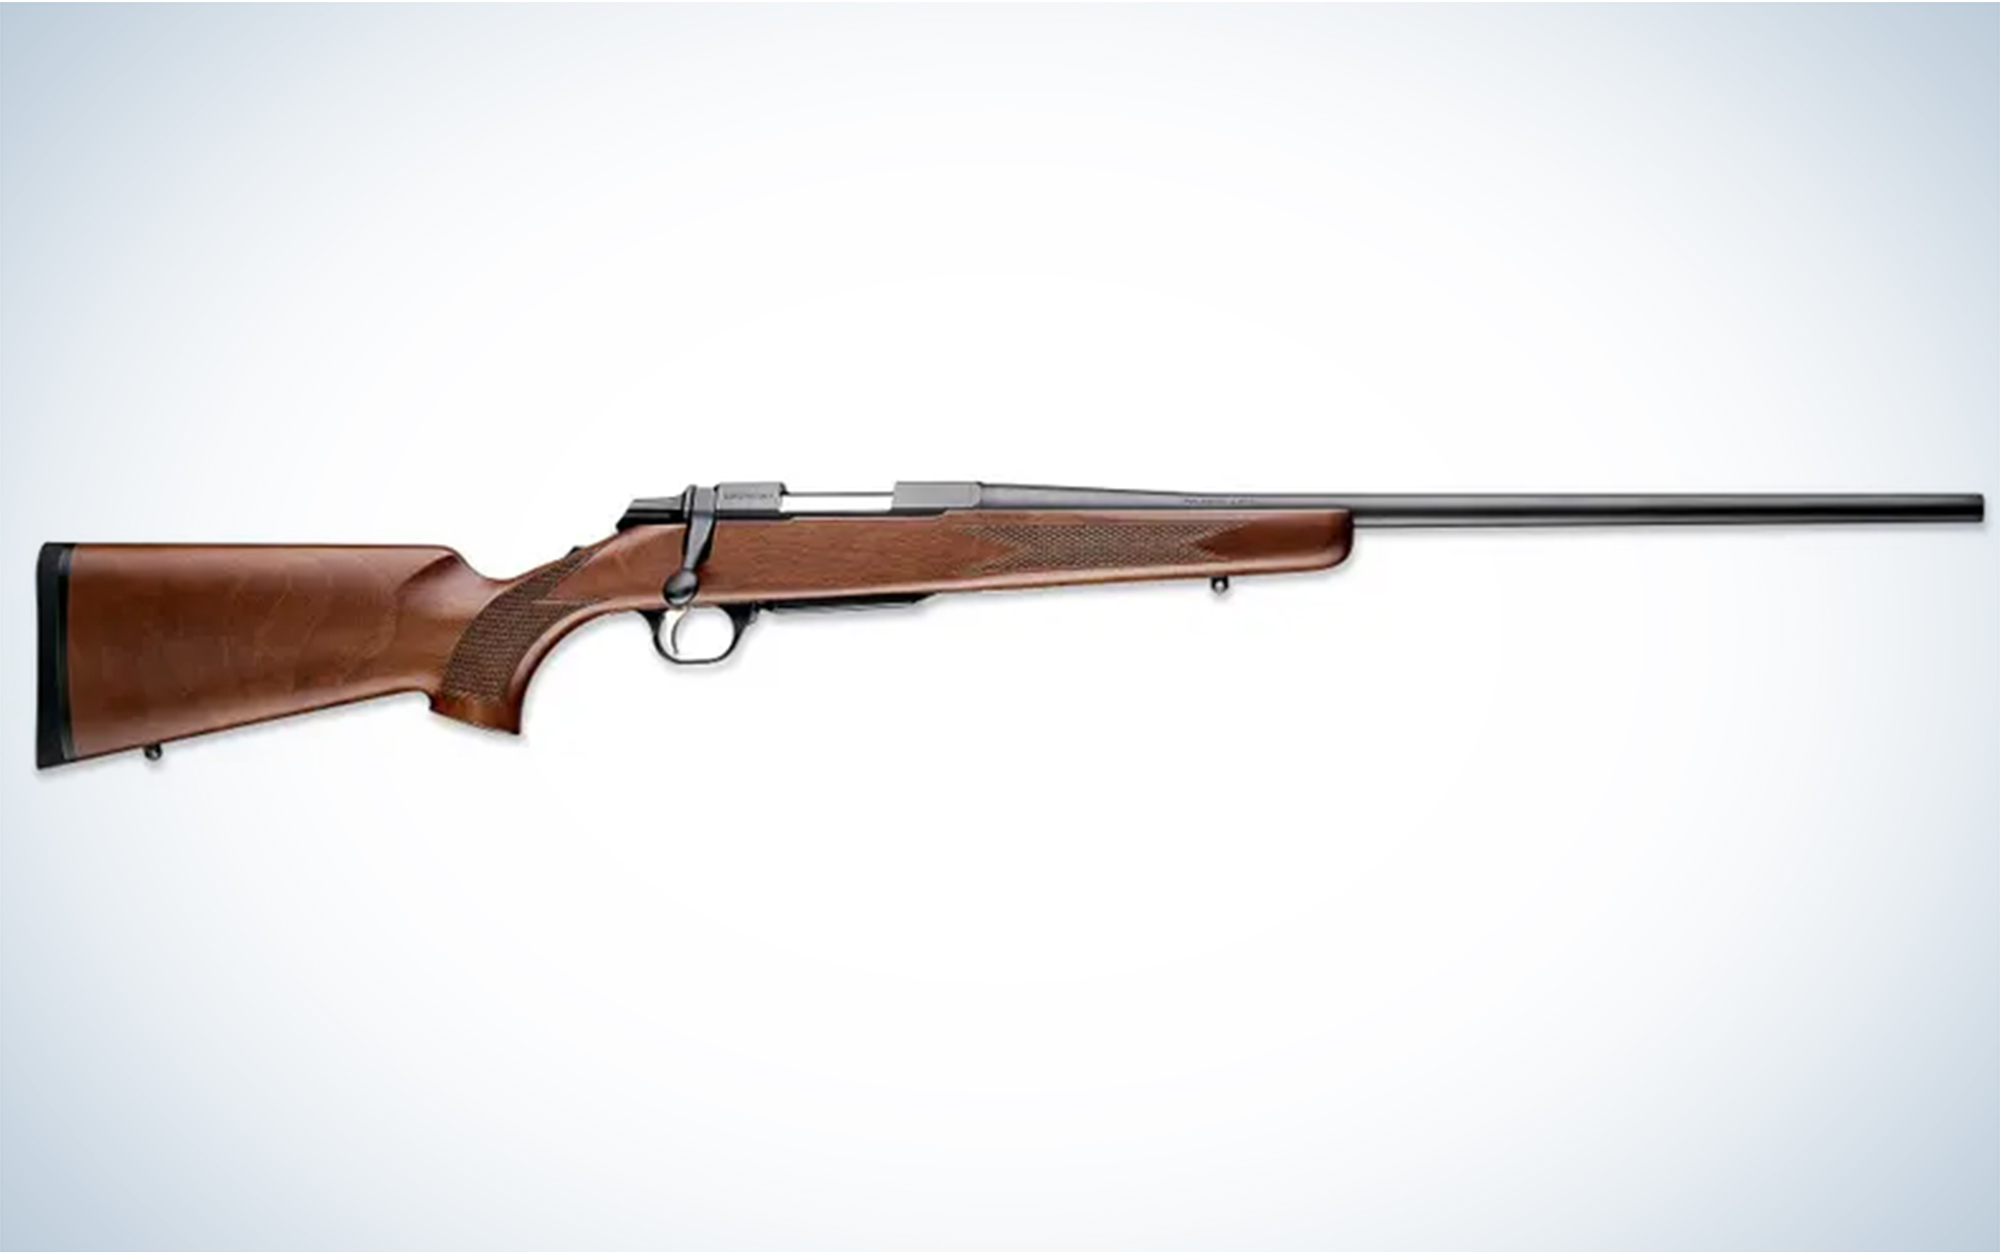 The Browning A-Bolt Hunter is a 12 gauge.